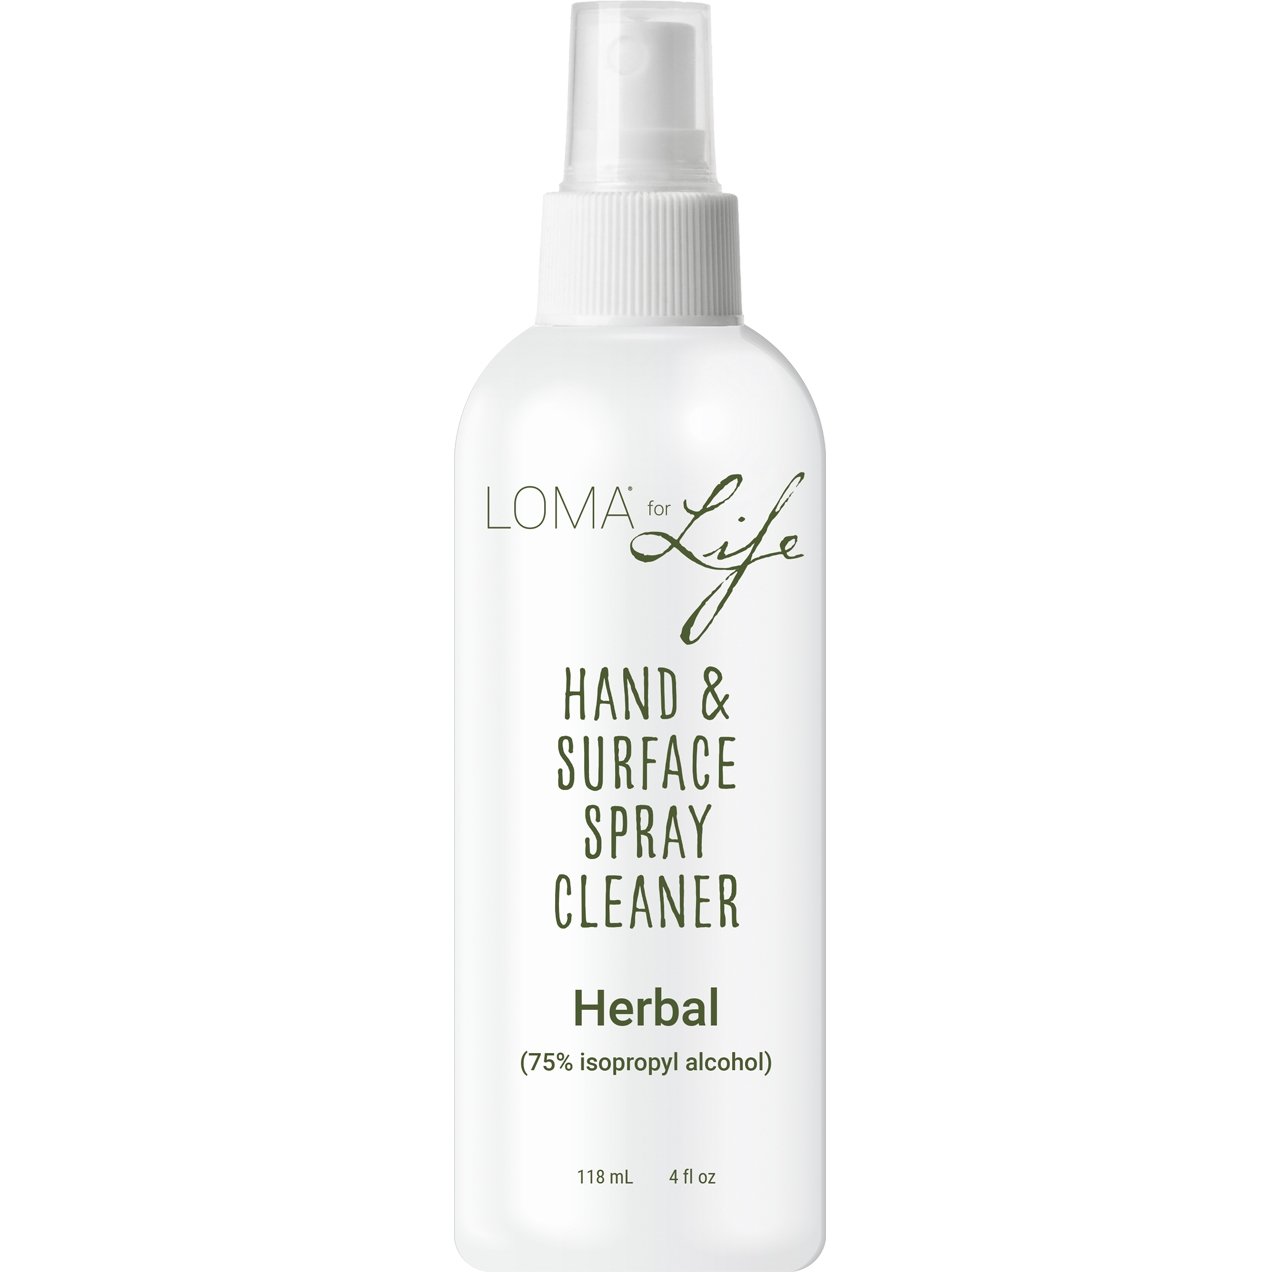 Hand & Surface Spray Cleaner